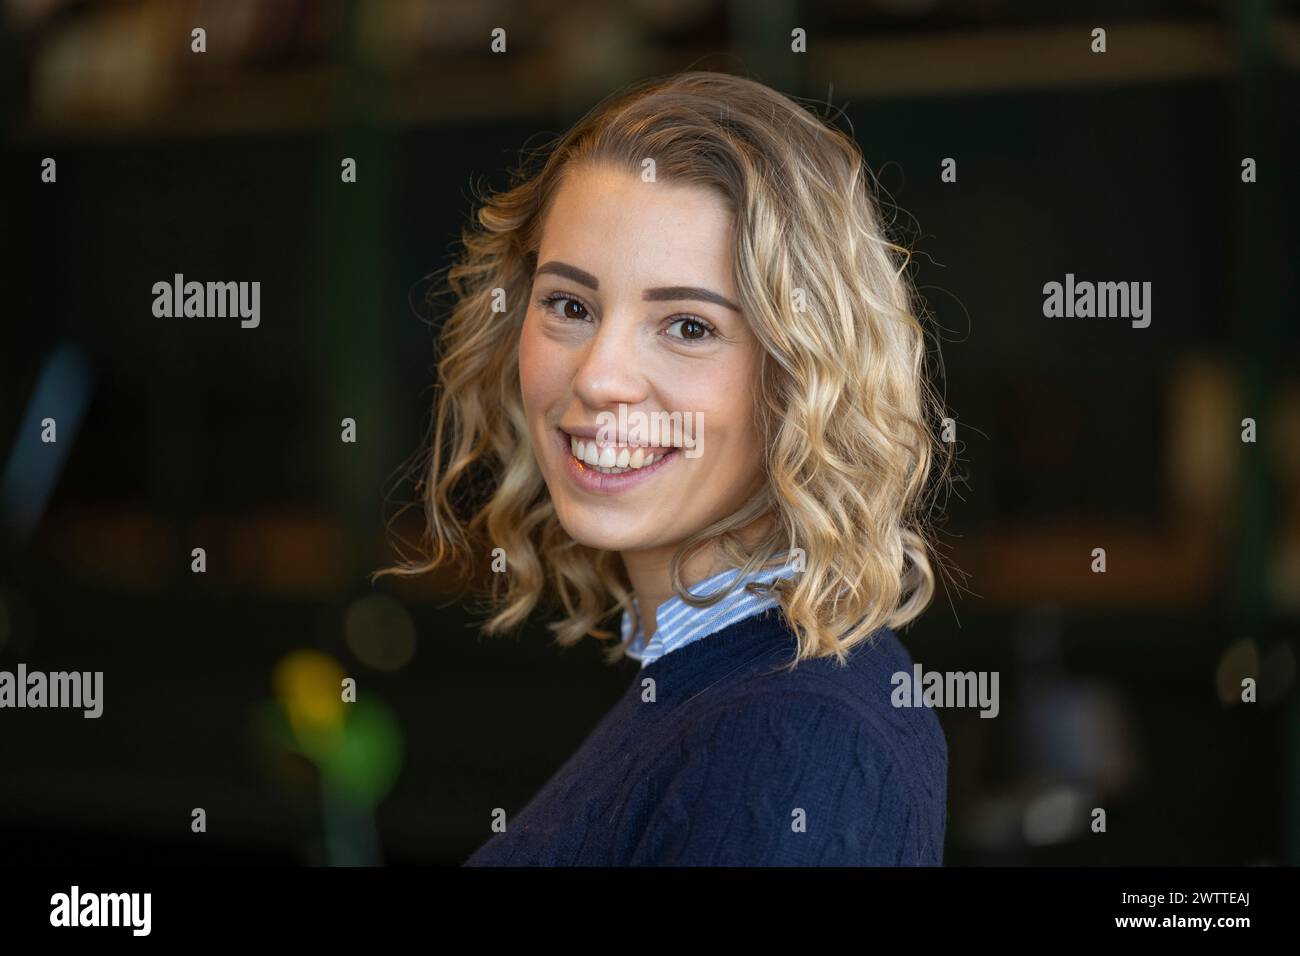 Smiling young woman with curly hair posing indoors Stock Photo